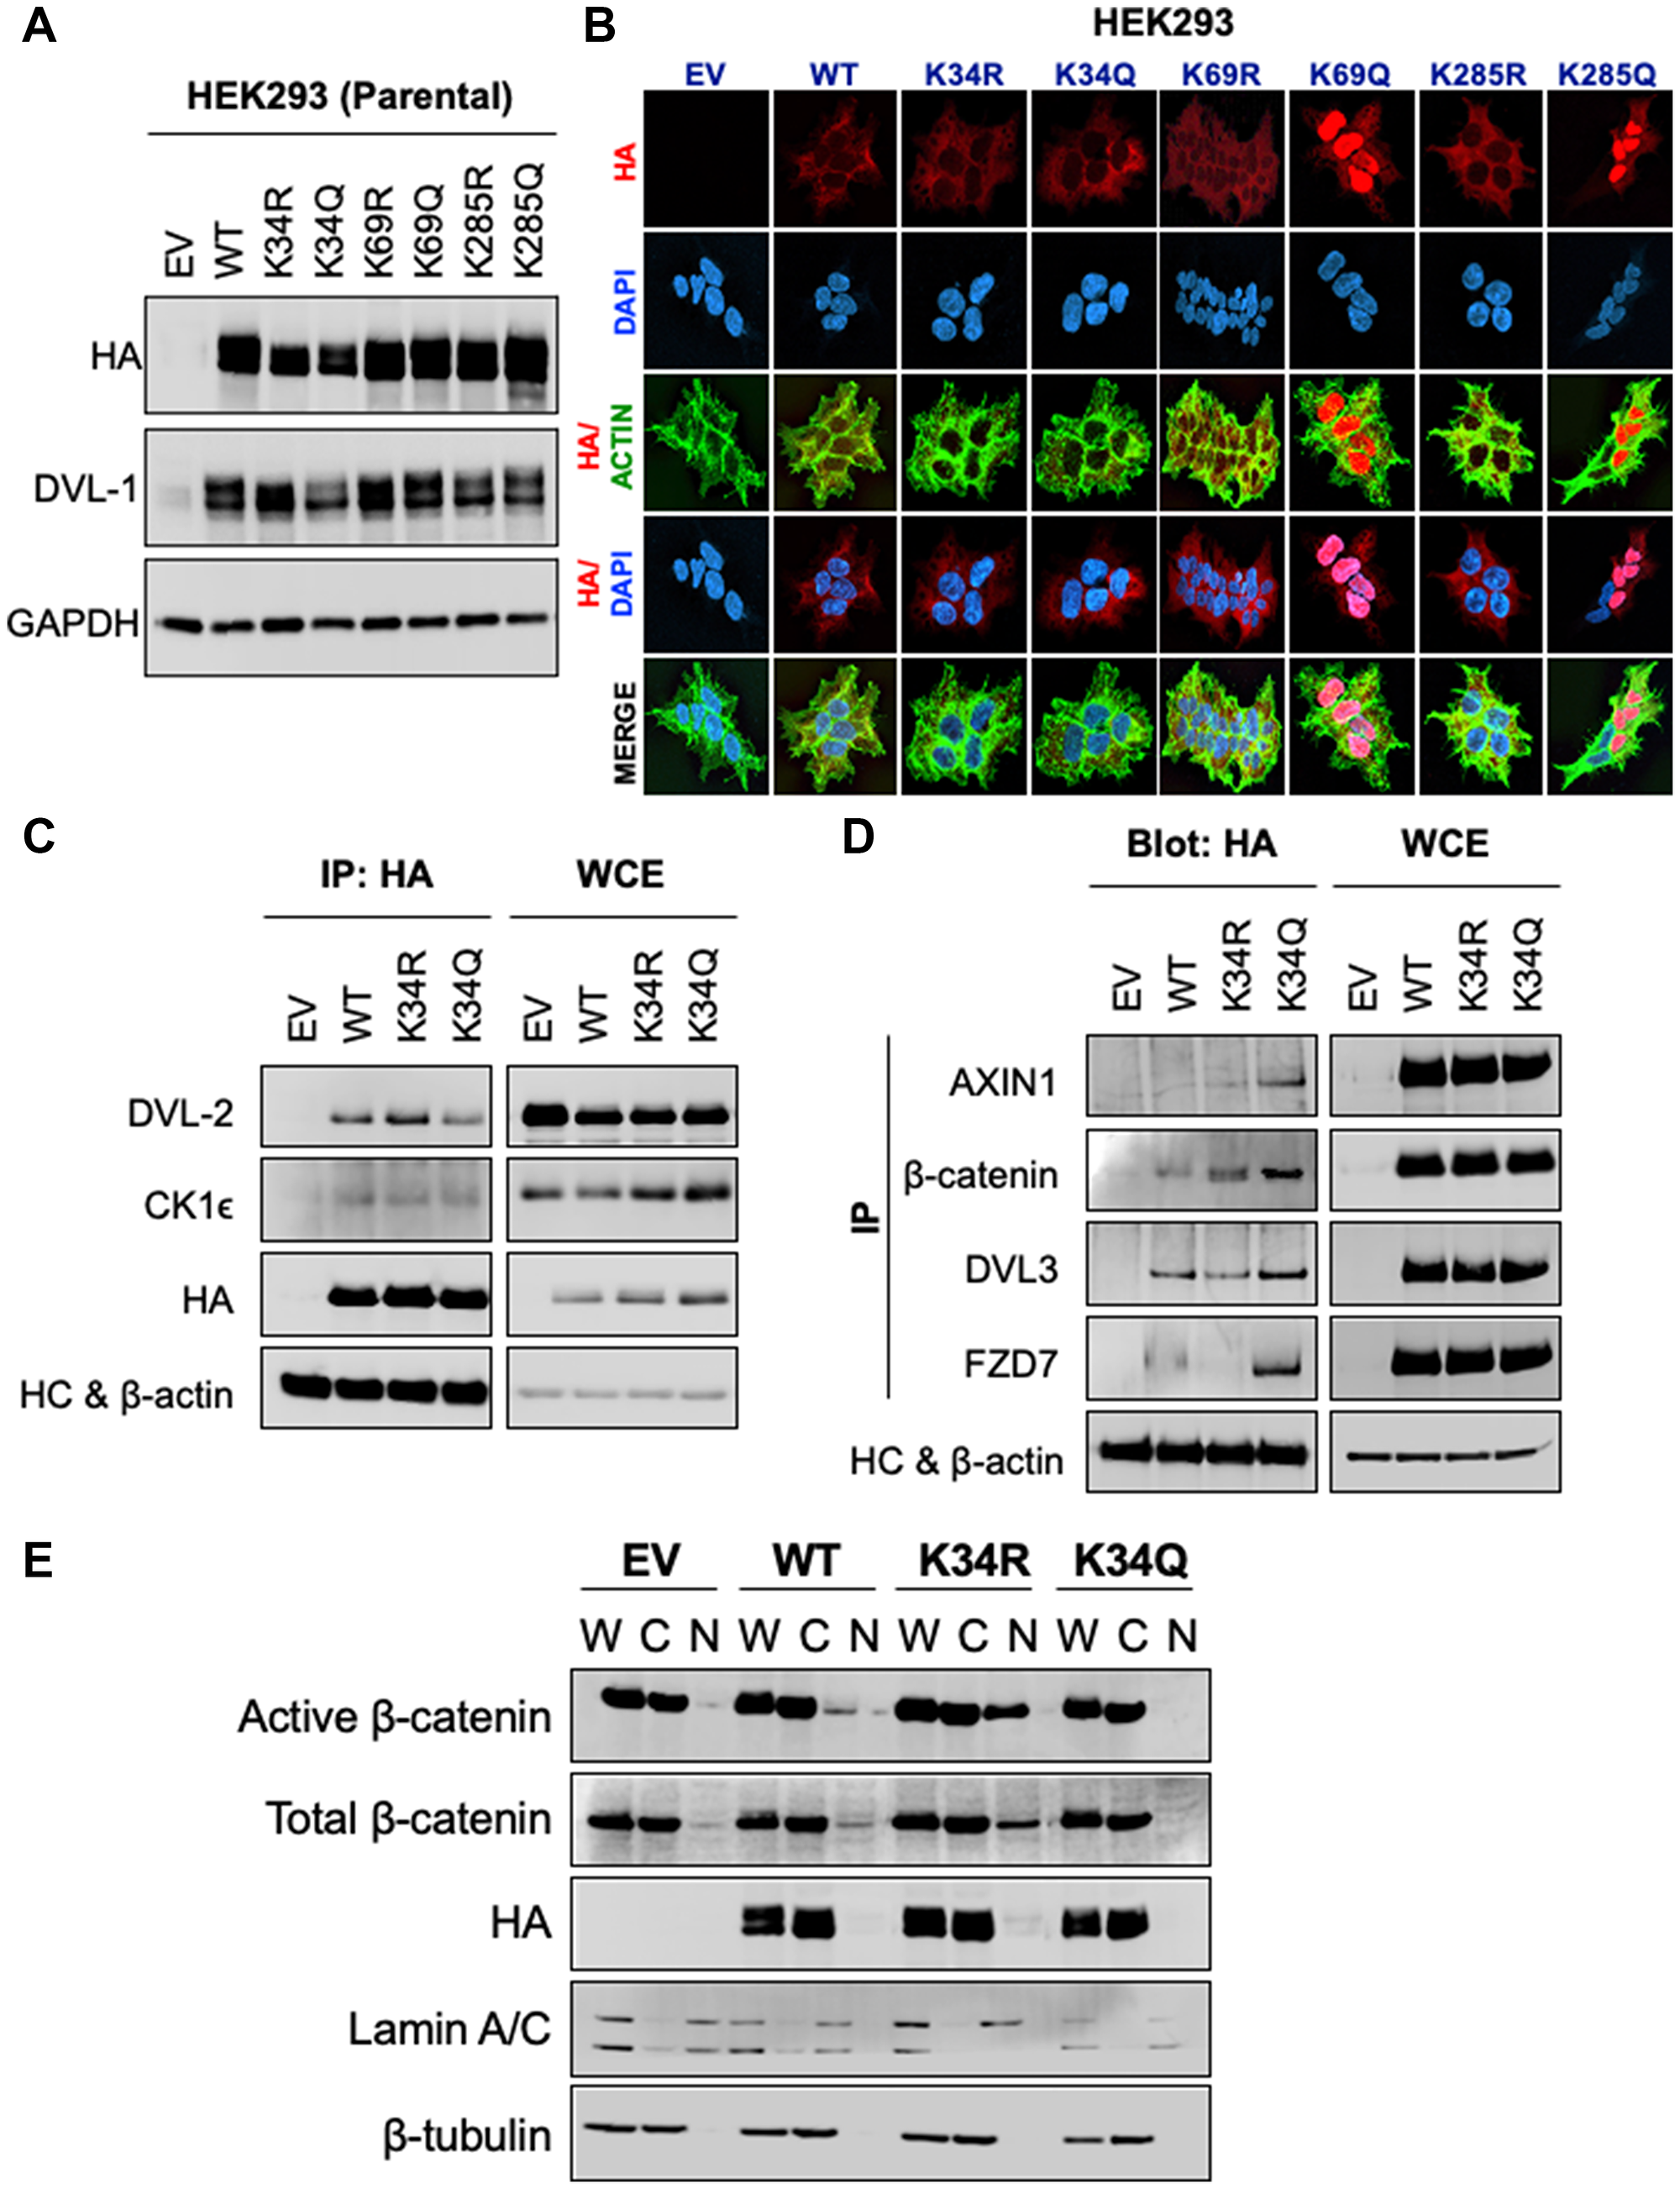 K34 residue regulates DVL-1 protein-protein interaction and entry of β-catenin into the nucleus, while K69 and K285 are critical for DVL-1 subcellular localization.